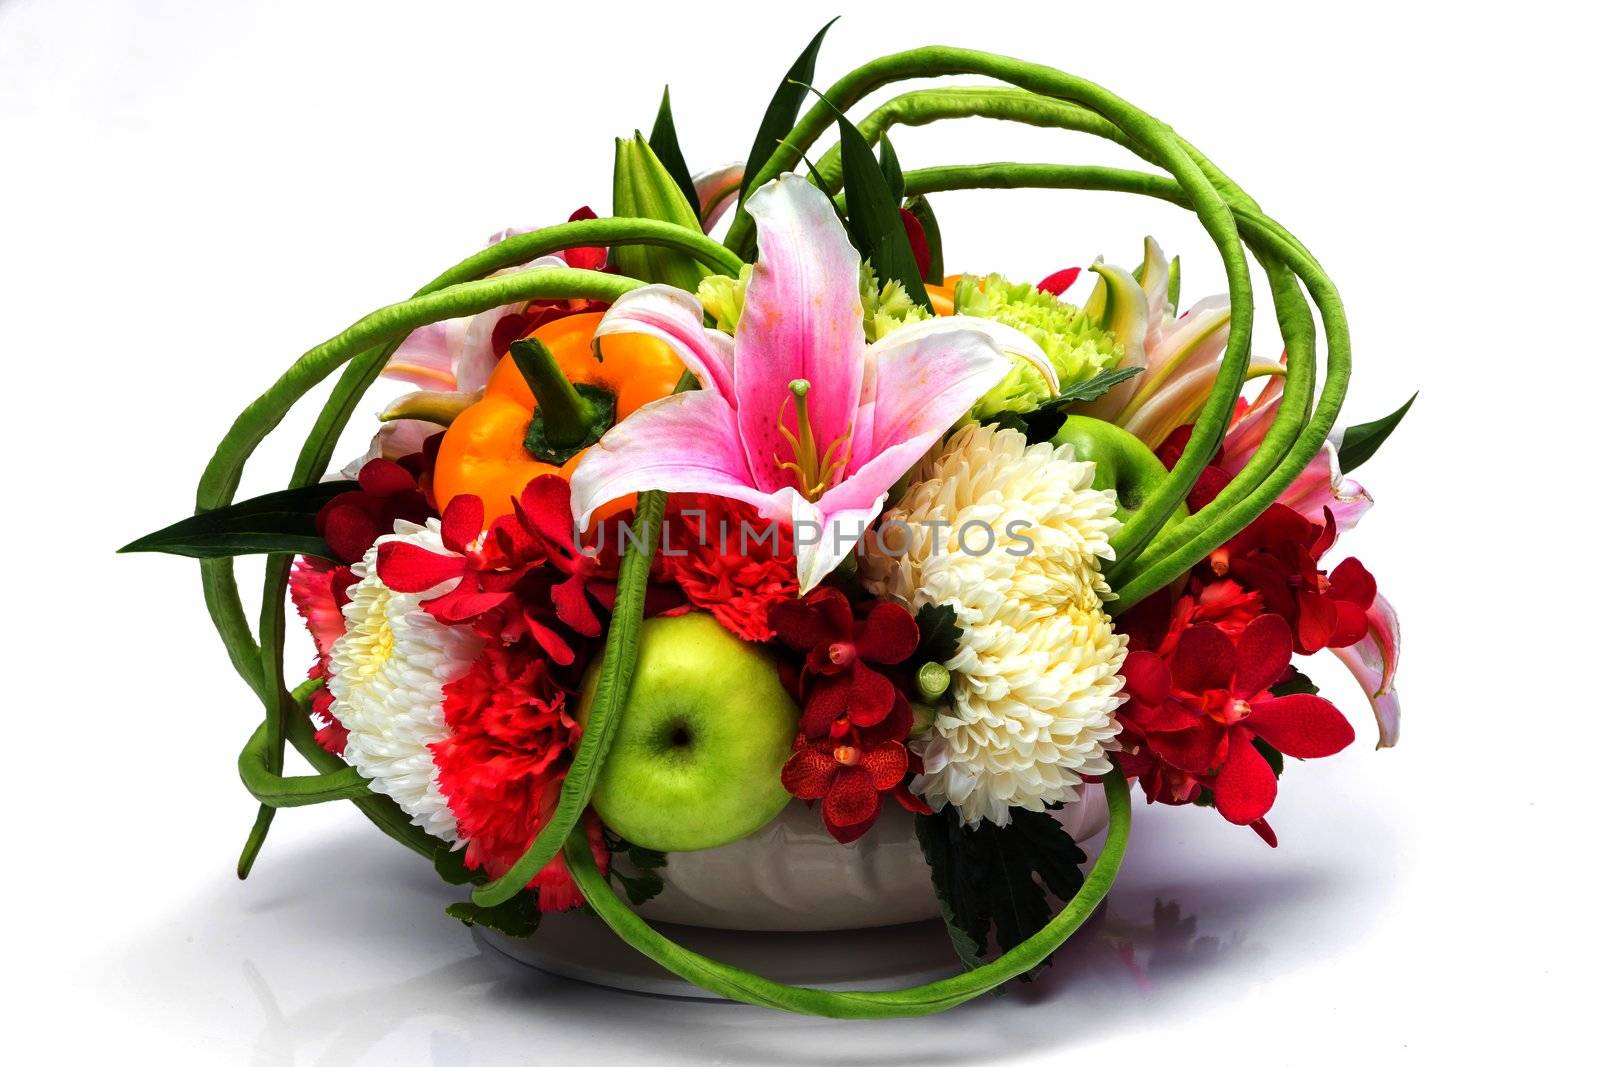 Bouquet of fruits, vegetables and flowers